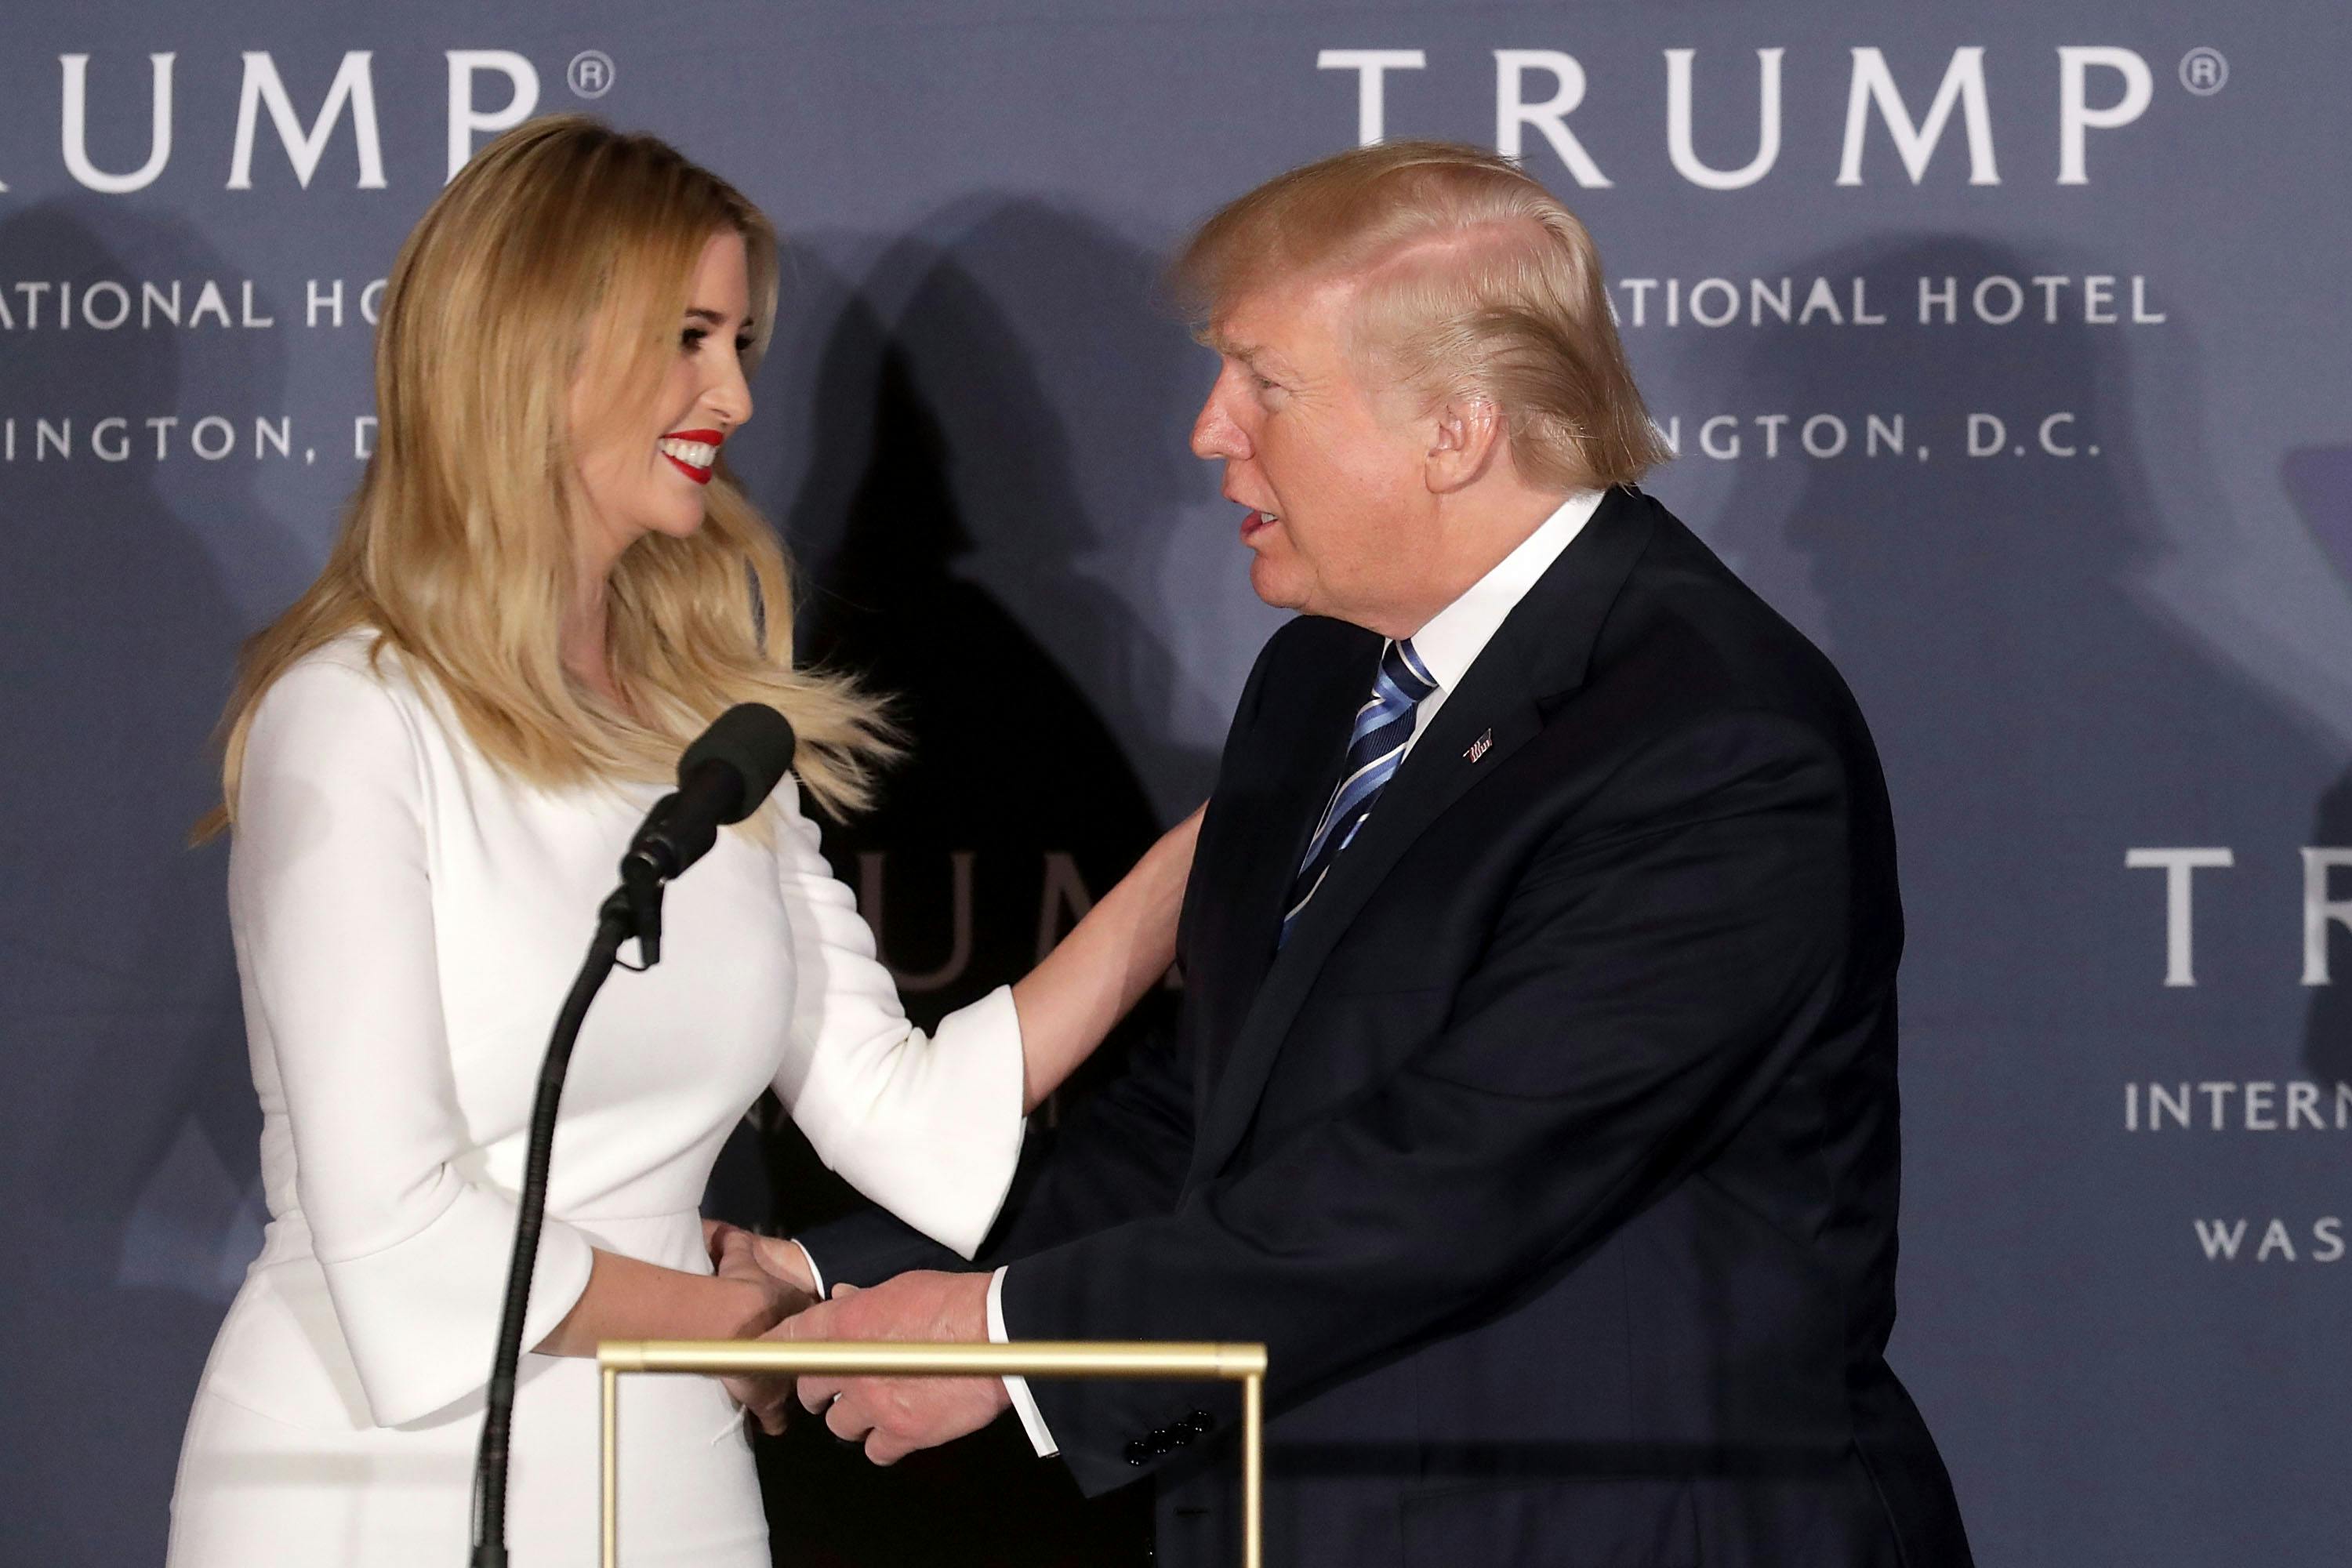 Donald Trump Fantasized About Having Sex With Ivanka, New Book Says The New Republic pic image